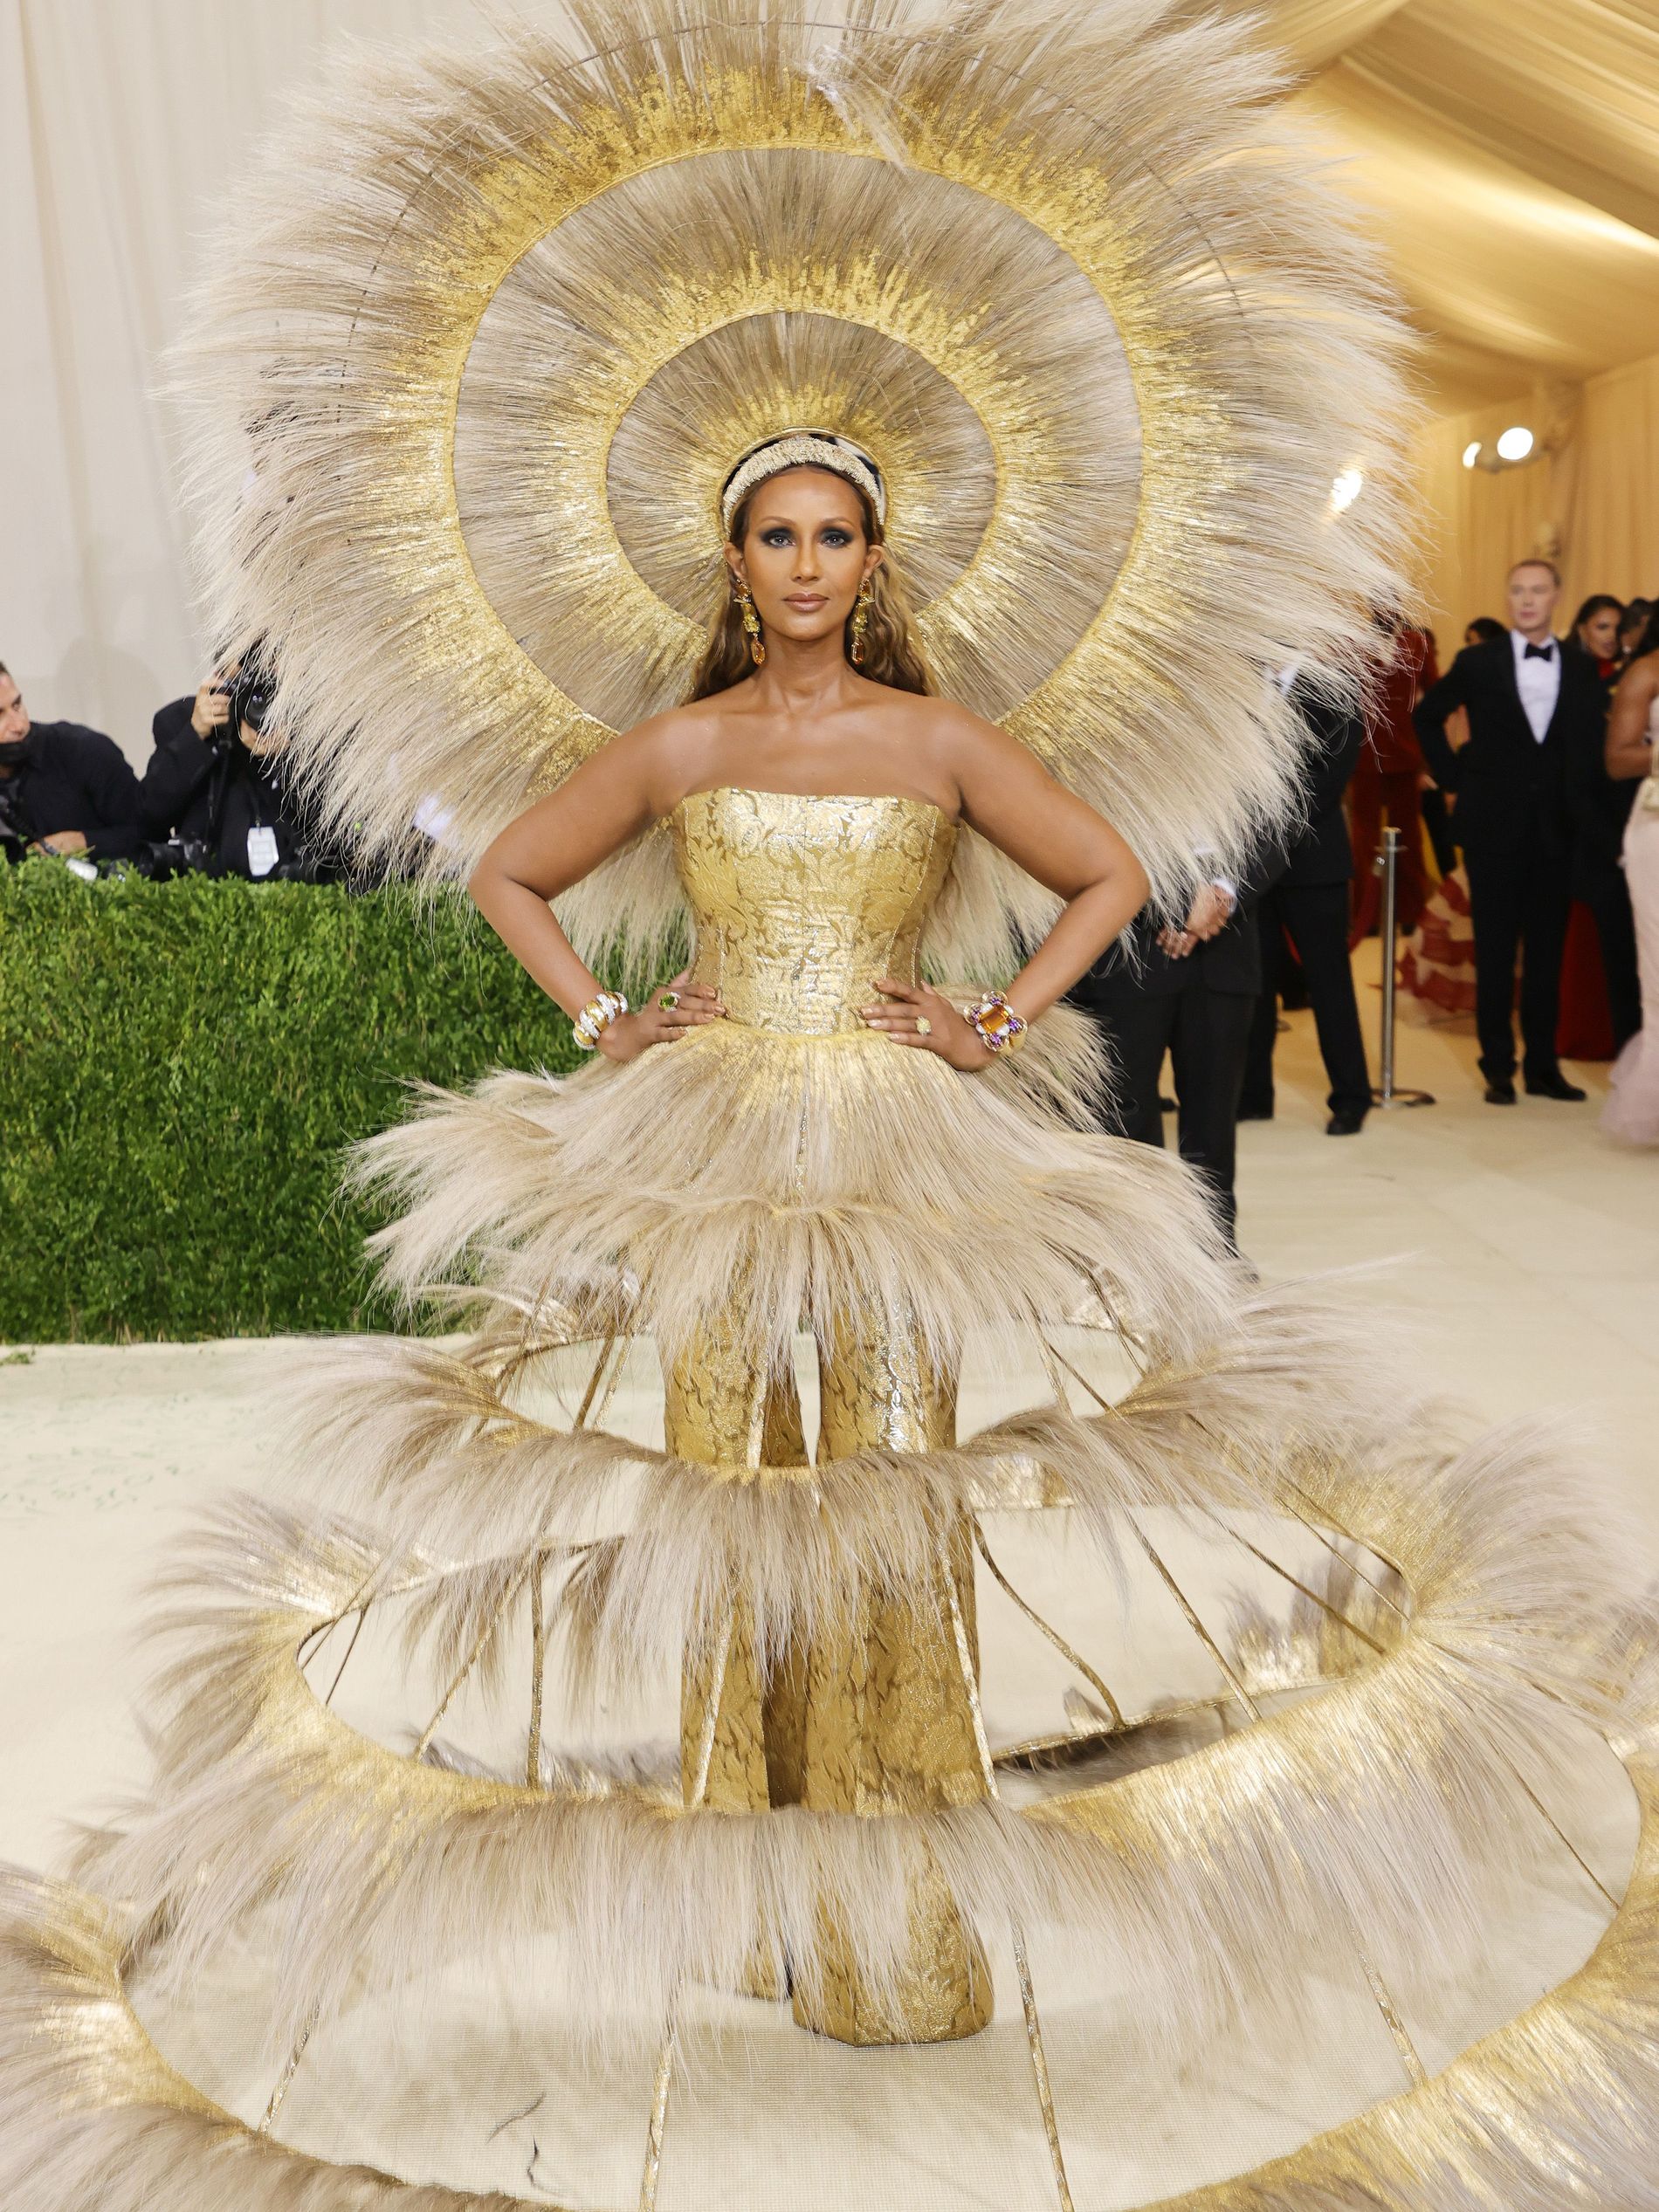 Every Look From the 2021 Met Gala Red Carpet